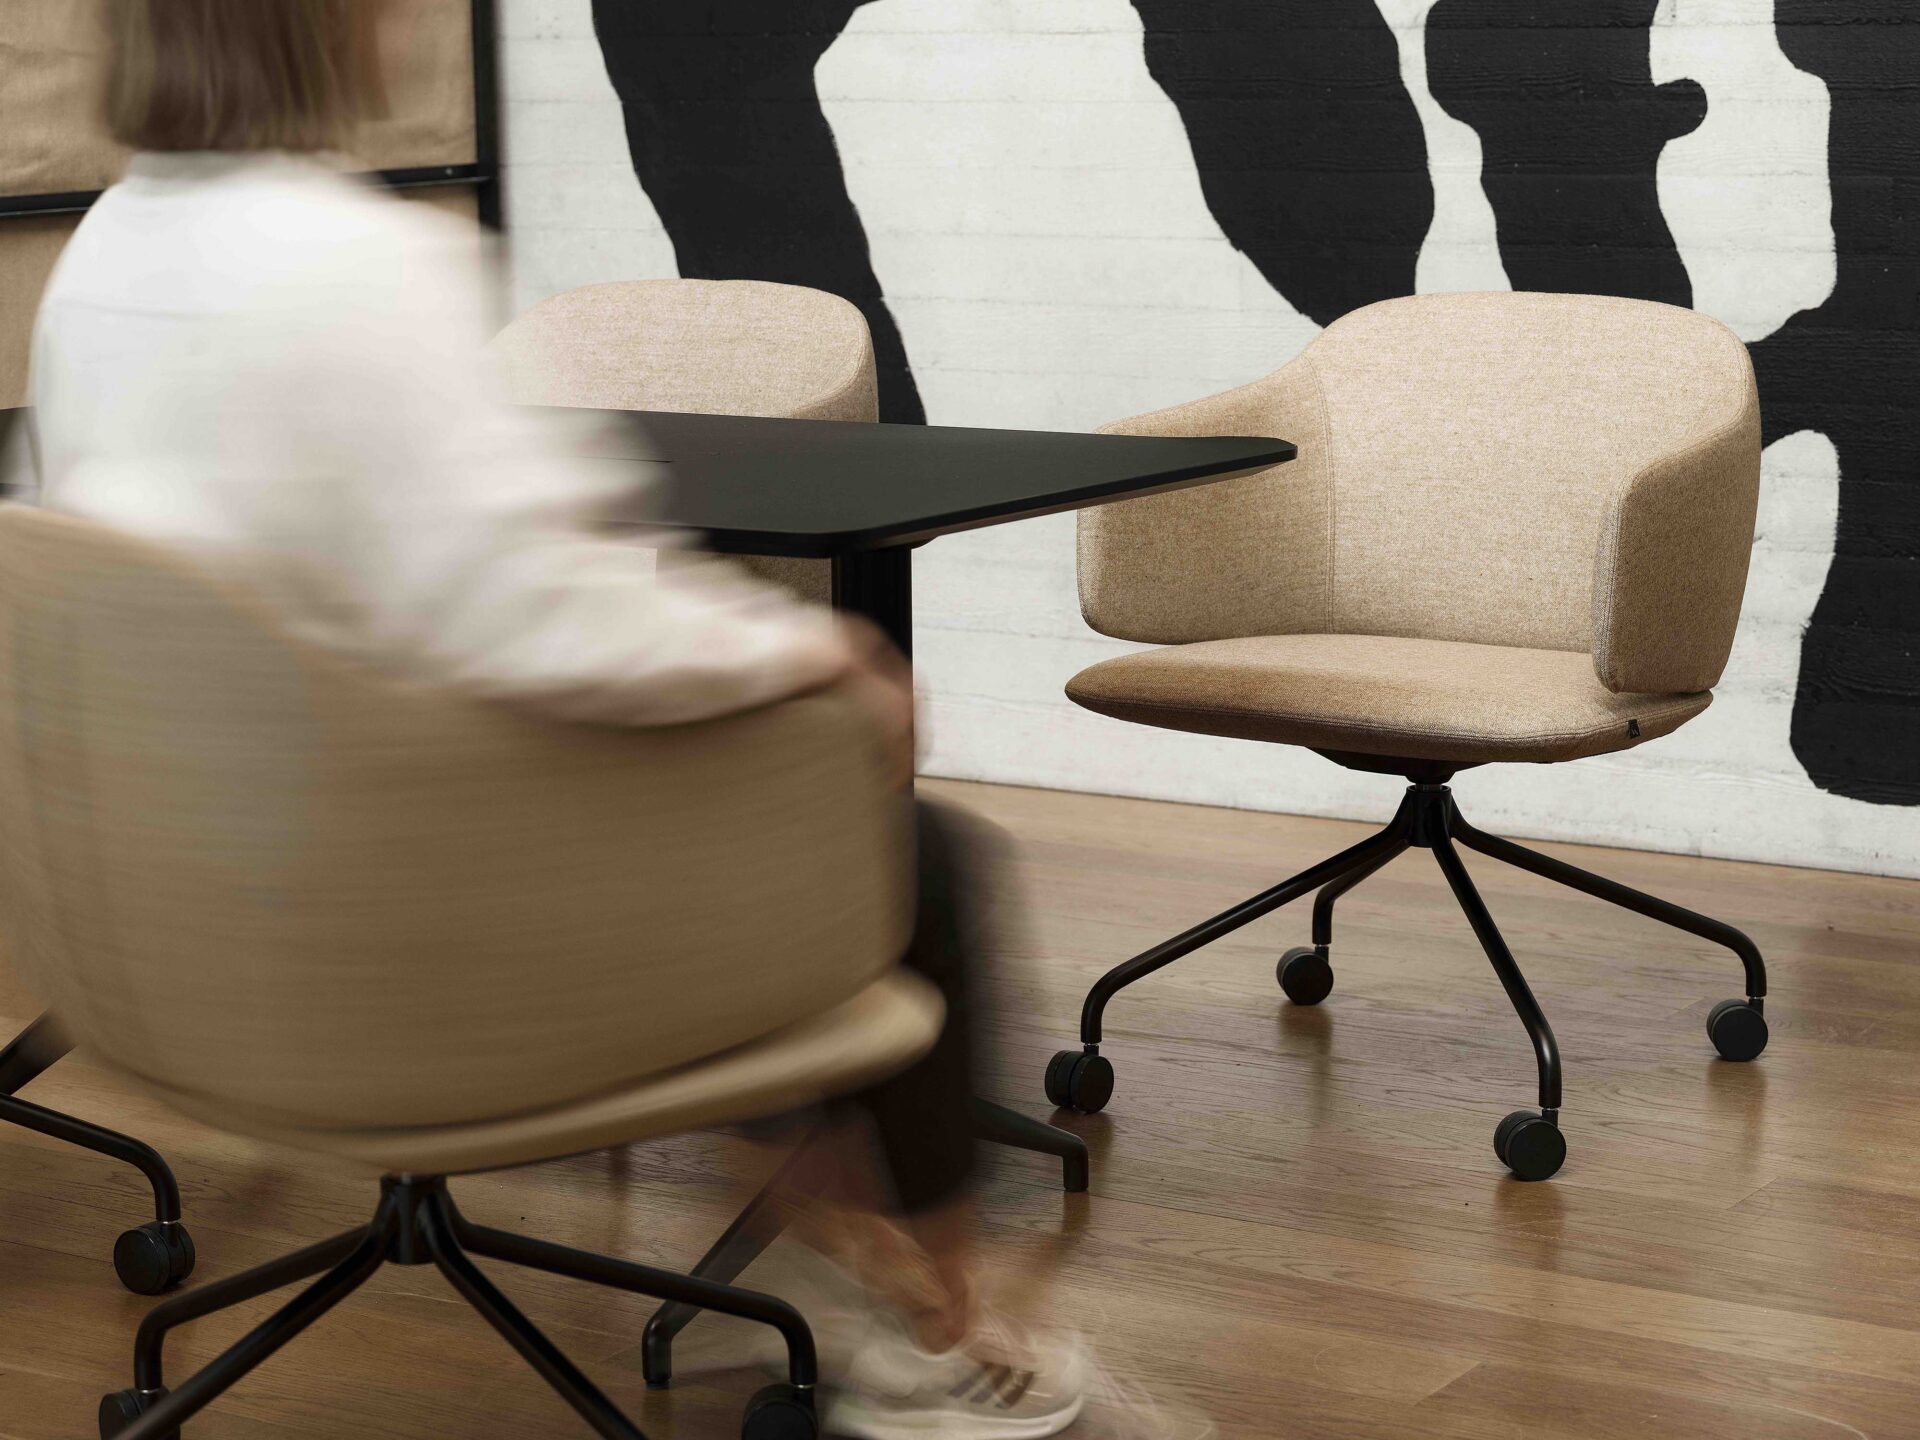 Woman sitting in a chair at a meeting table